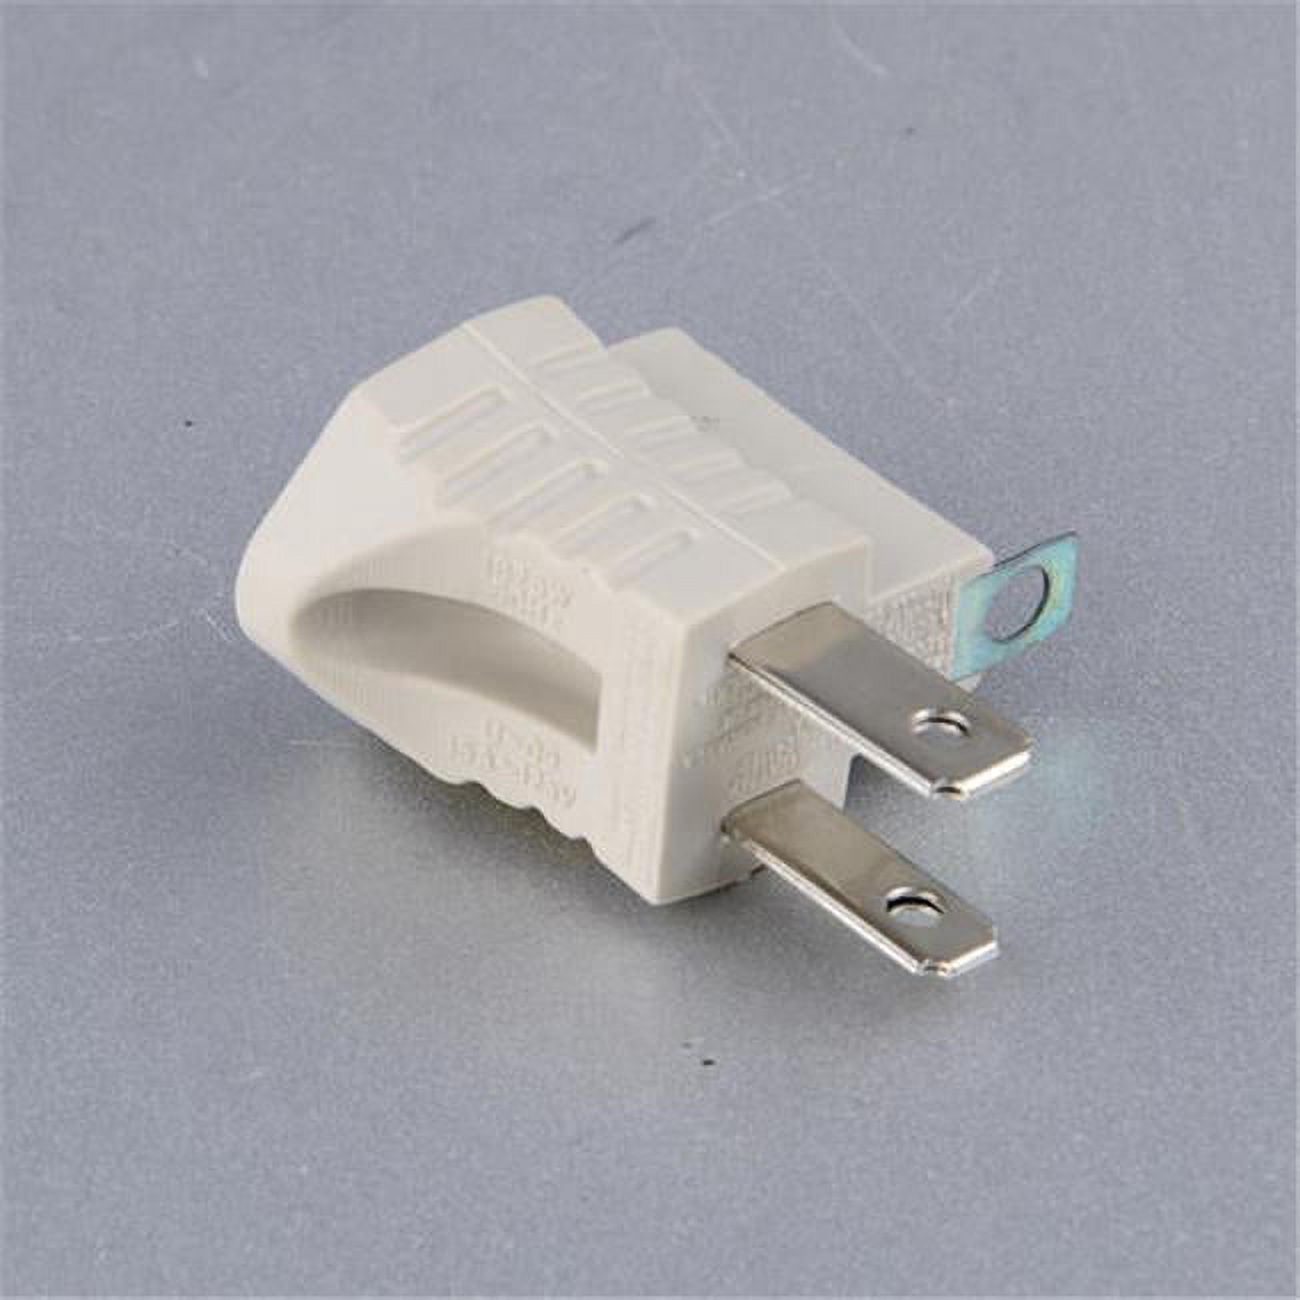 3539806 Grounded 1 Outlets 3 To 2 Grounding Adapter, Pack Of 25